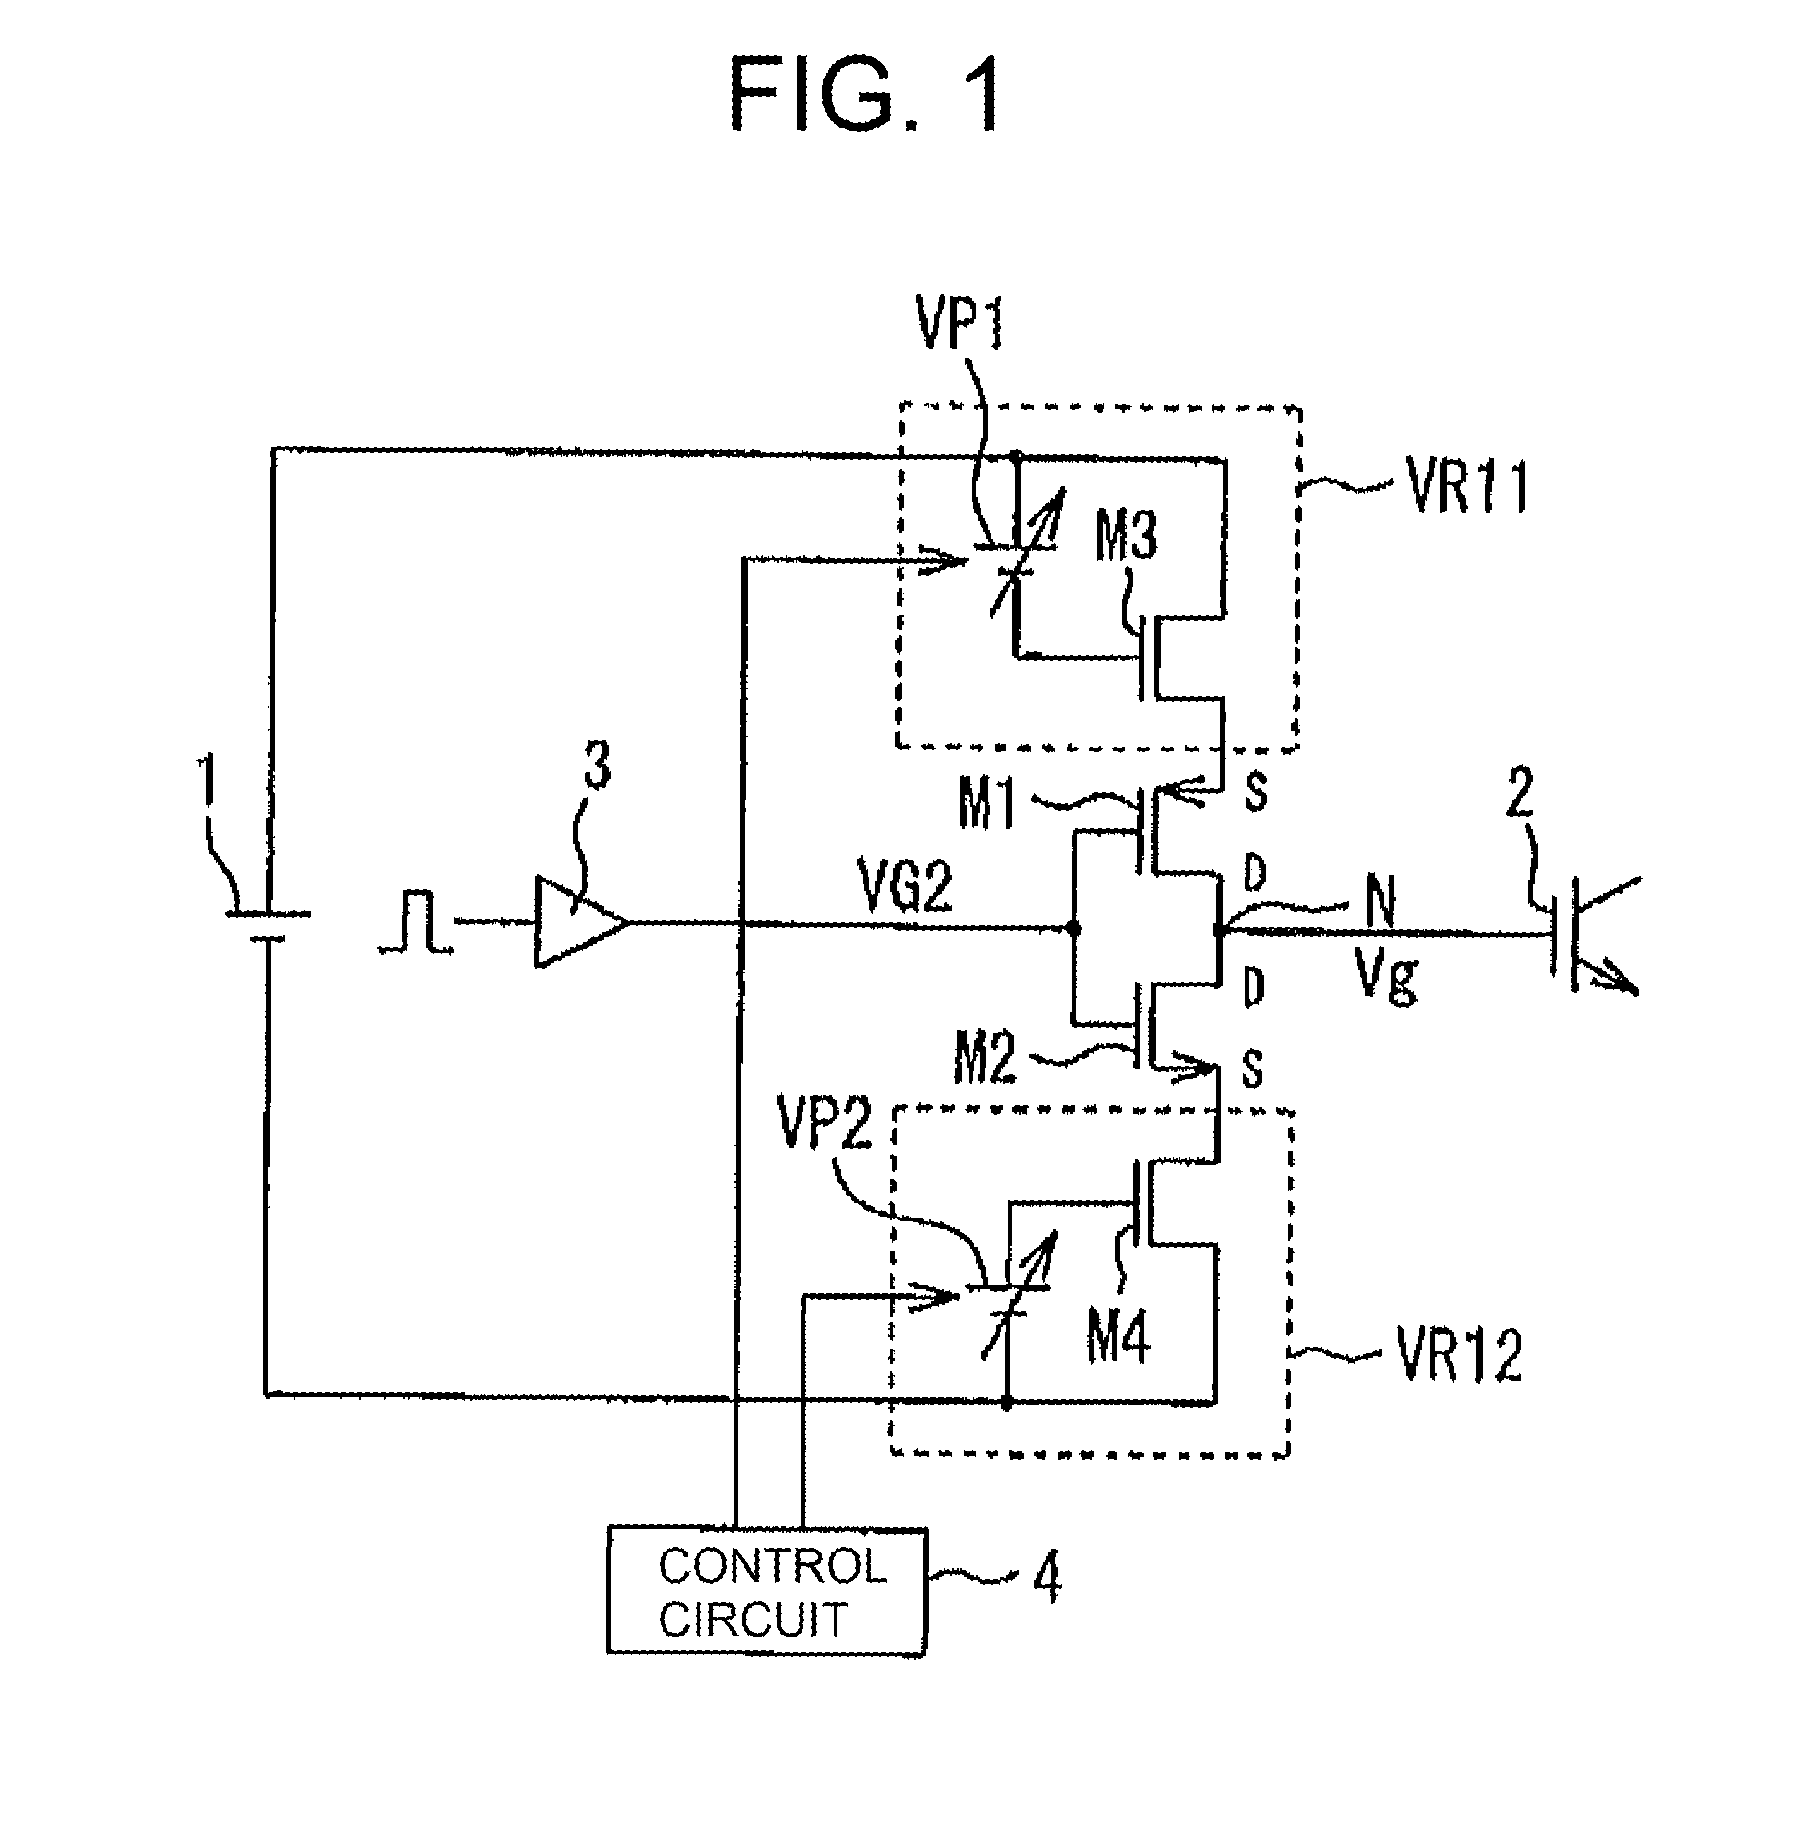 Voltage controlled switching element gate drive circuit